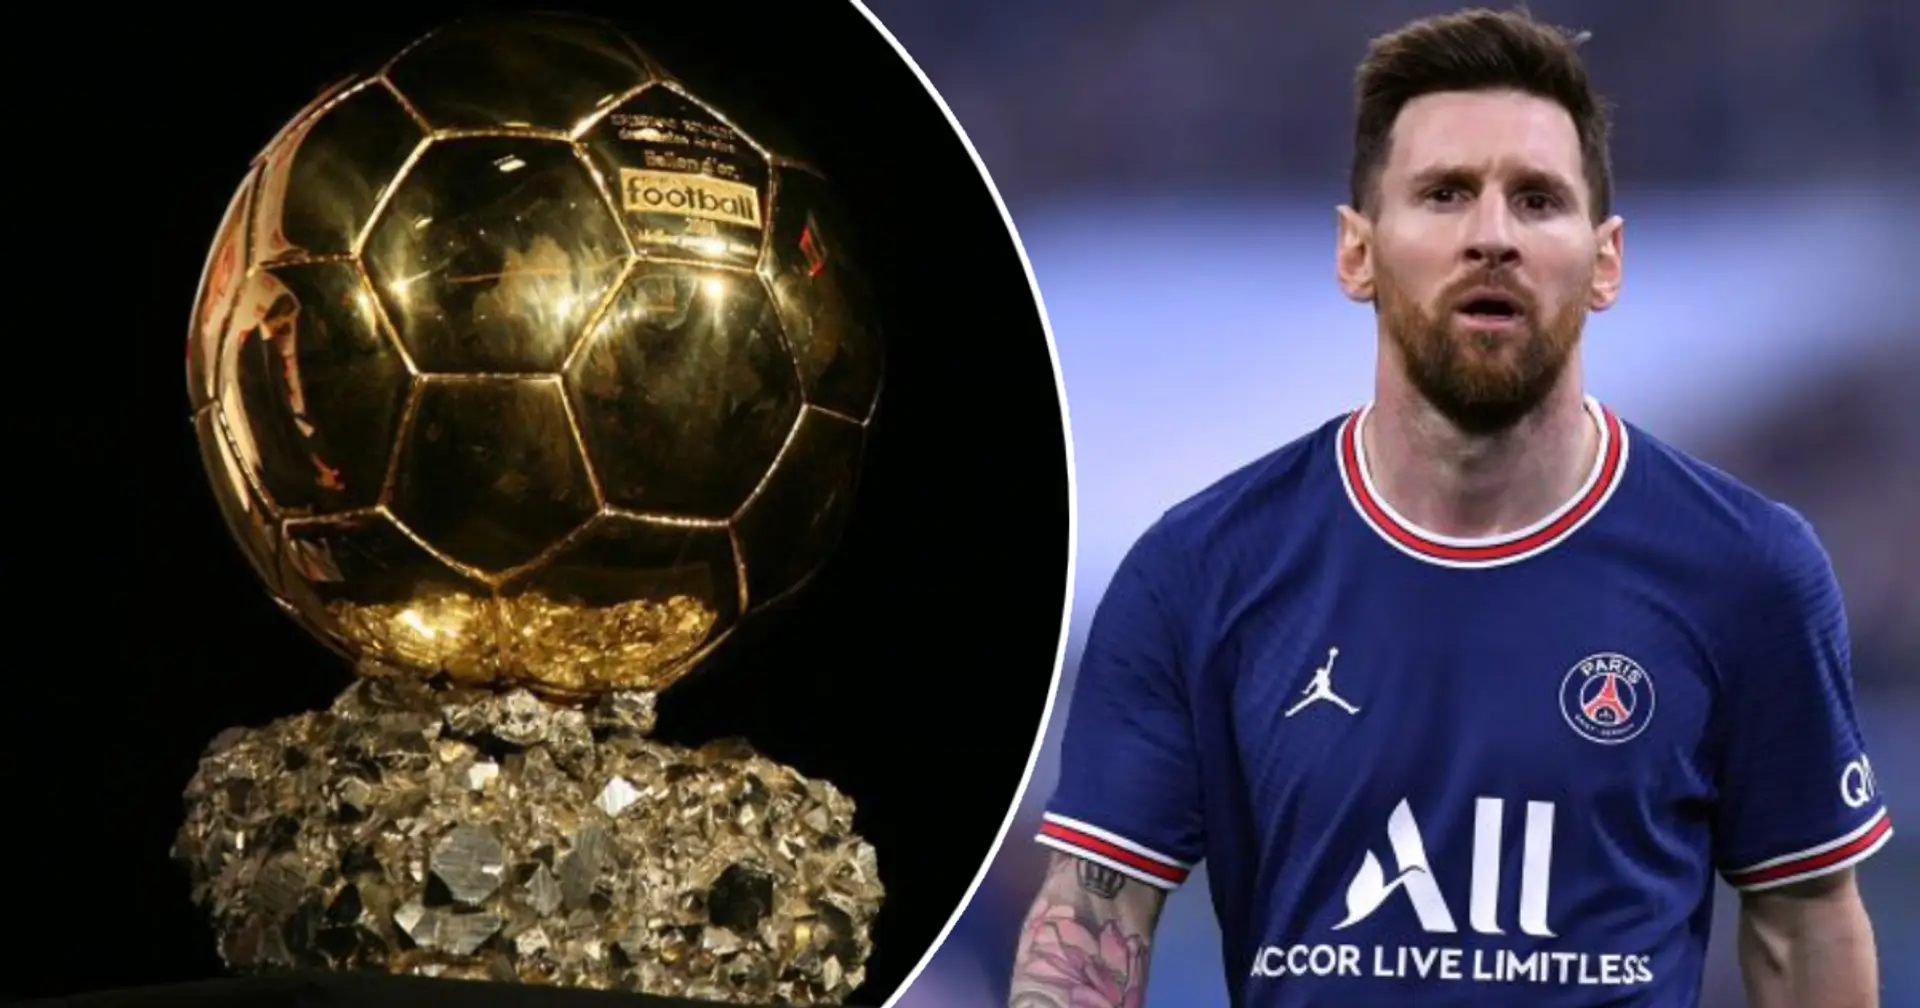 Leaked: Final Ballon d’Or results published on social media, 2021 winner is not Messi 